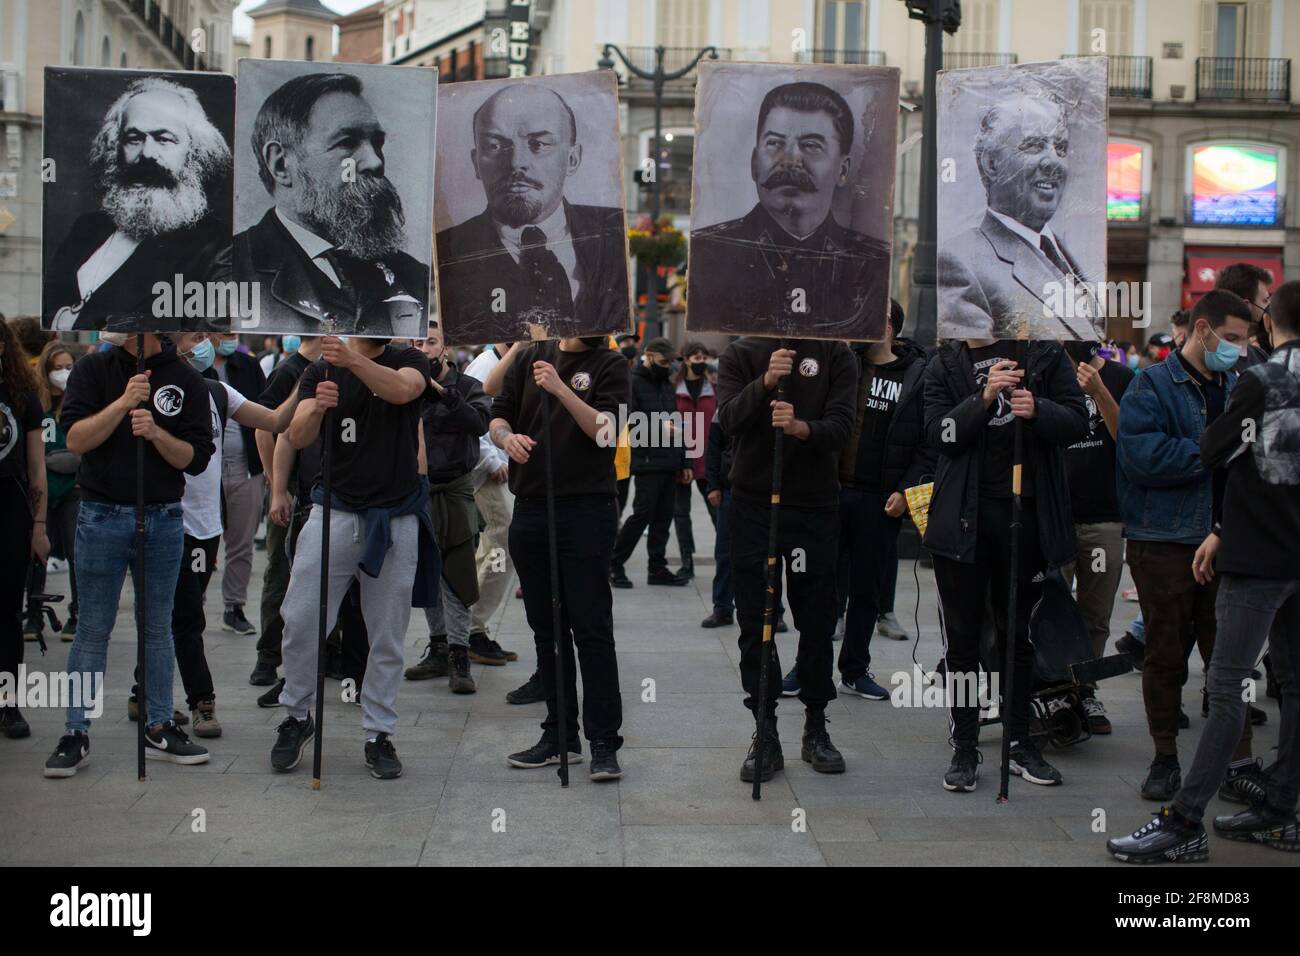 Madrid, Spain. 14th Apr, 2021. Young people holding portraits of (left to right) Marx, Engels, Lenin, Stalin and Hoxha during the second Spanish republic 90th anniversary march. The second Spanish republic was proclaimed on April 14, 1931 and was interrupted in 1936 by a coup, which led to three years of Civil War. In 1939, with the victory of the nationalist side, the Franco dictatorship was installed, in force for 36 years. (Photo by Luis Soto/SOPA Images/Sipa USA) Credit: Sipa USA/Alamy Live News Stock Photo